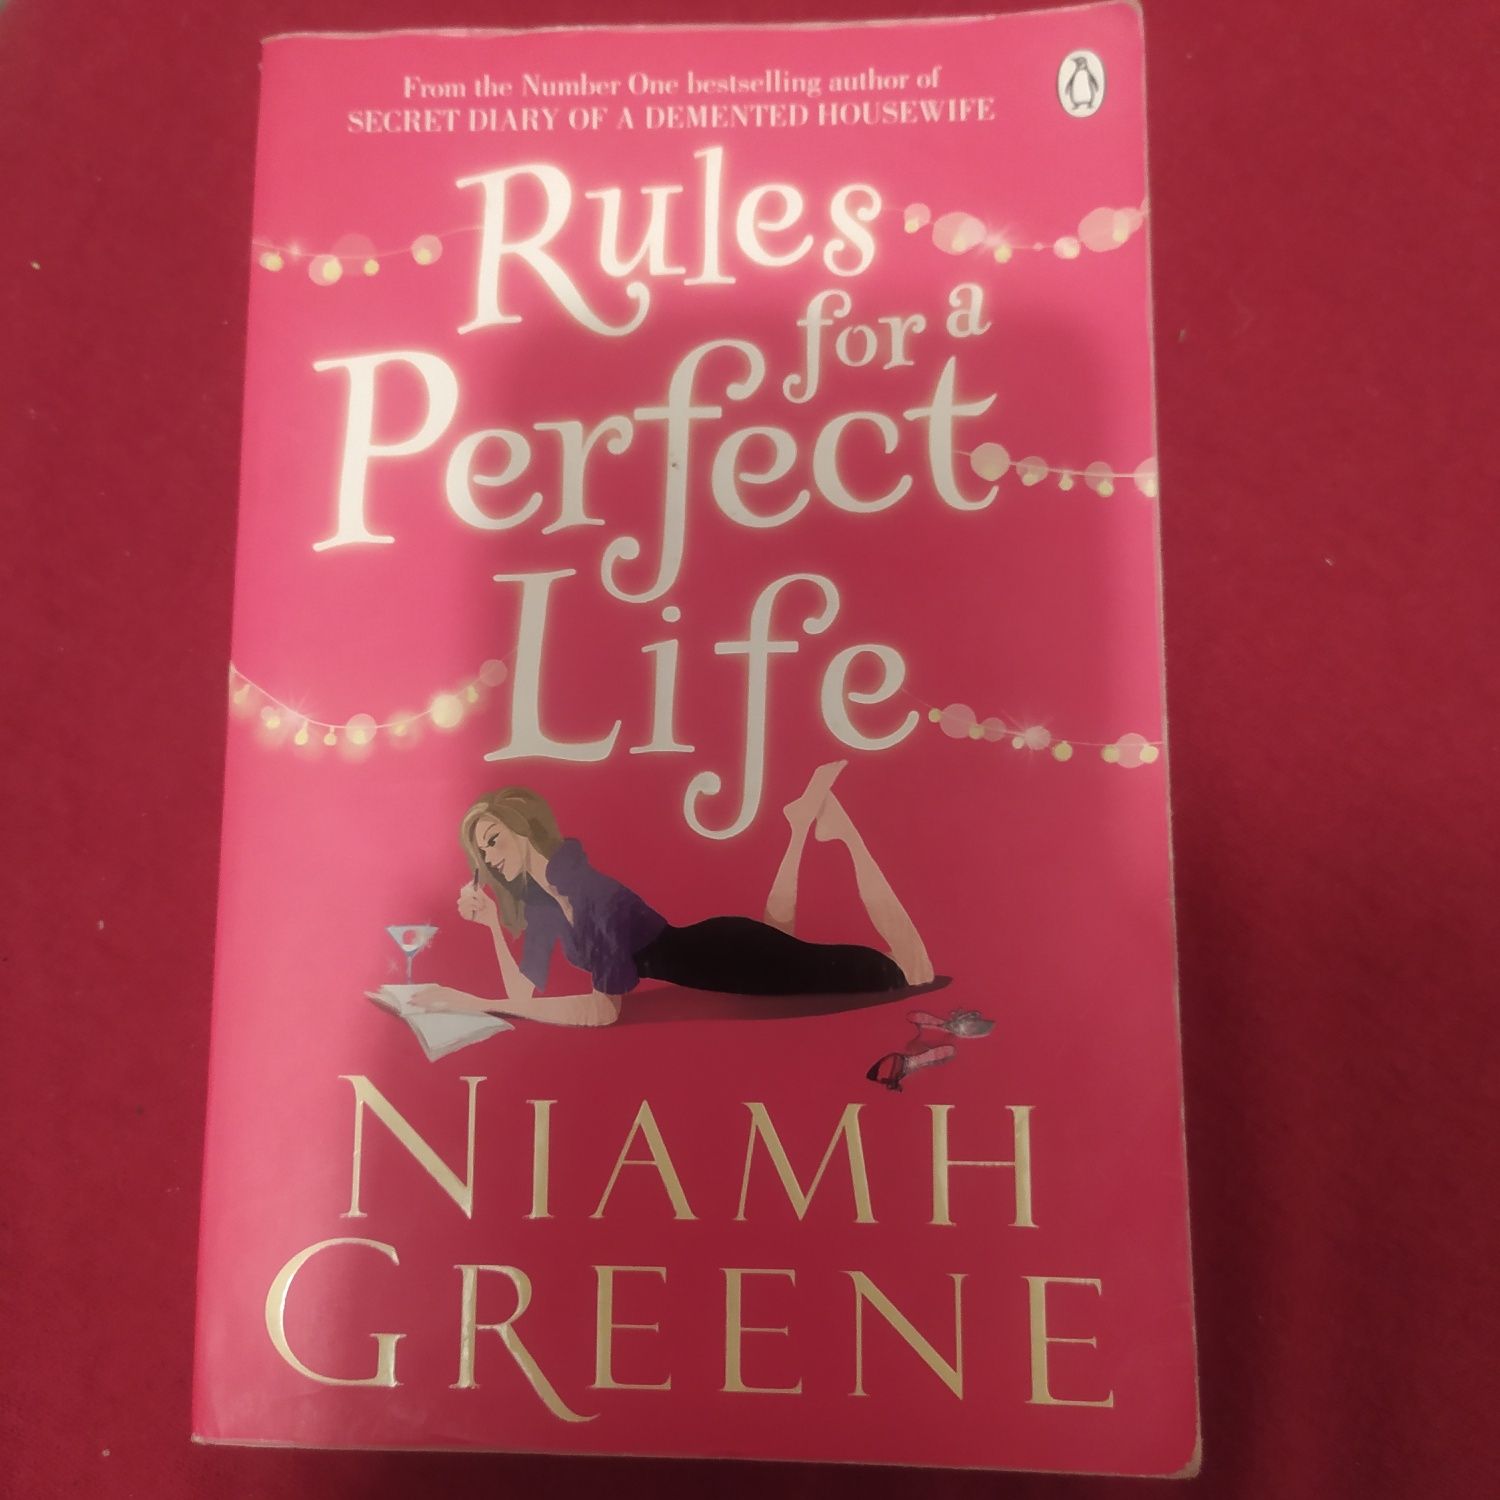 Rules for a perfect life - Niamh Greene